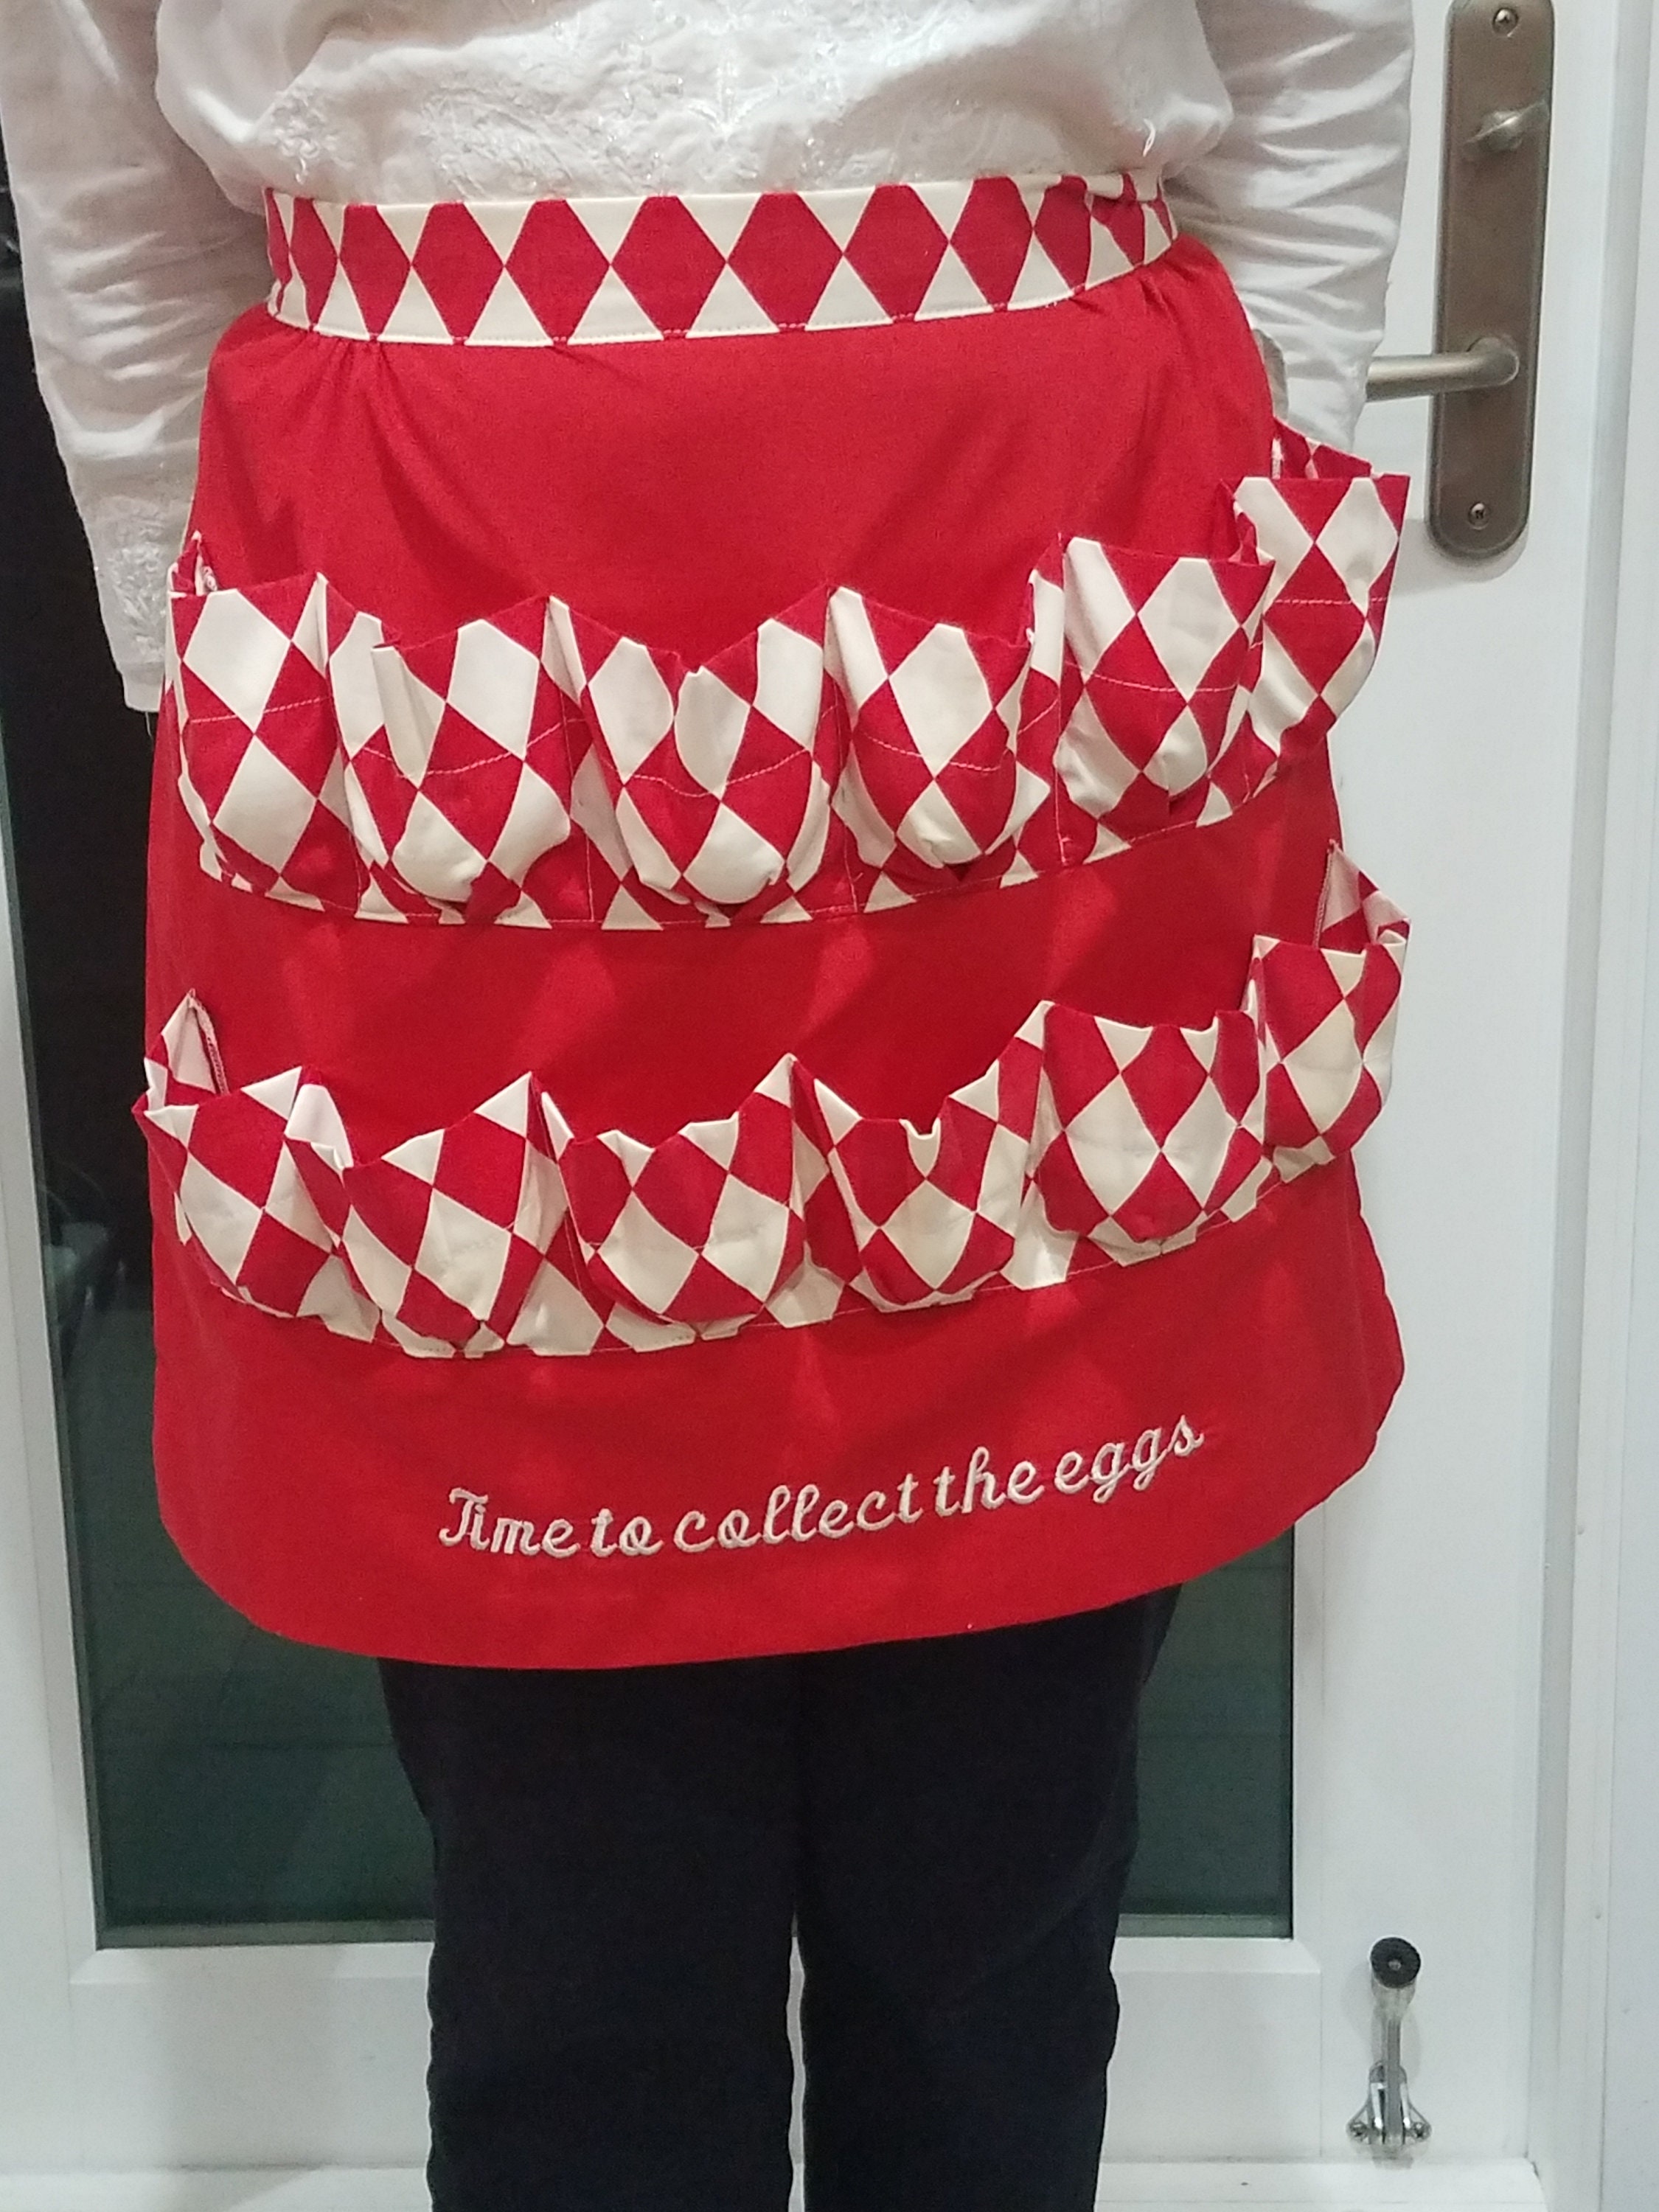 Egg Collecting Apron, Egg Gathering Apron, Gift for Mom, Christmas Gift,  Farmhouse Apron, Pink Apron With Pockets 